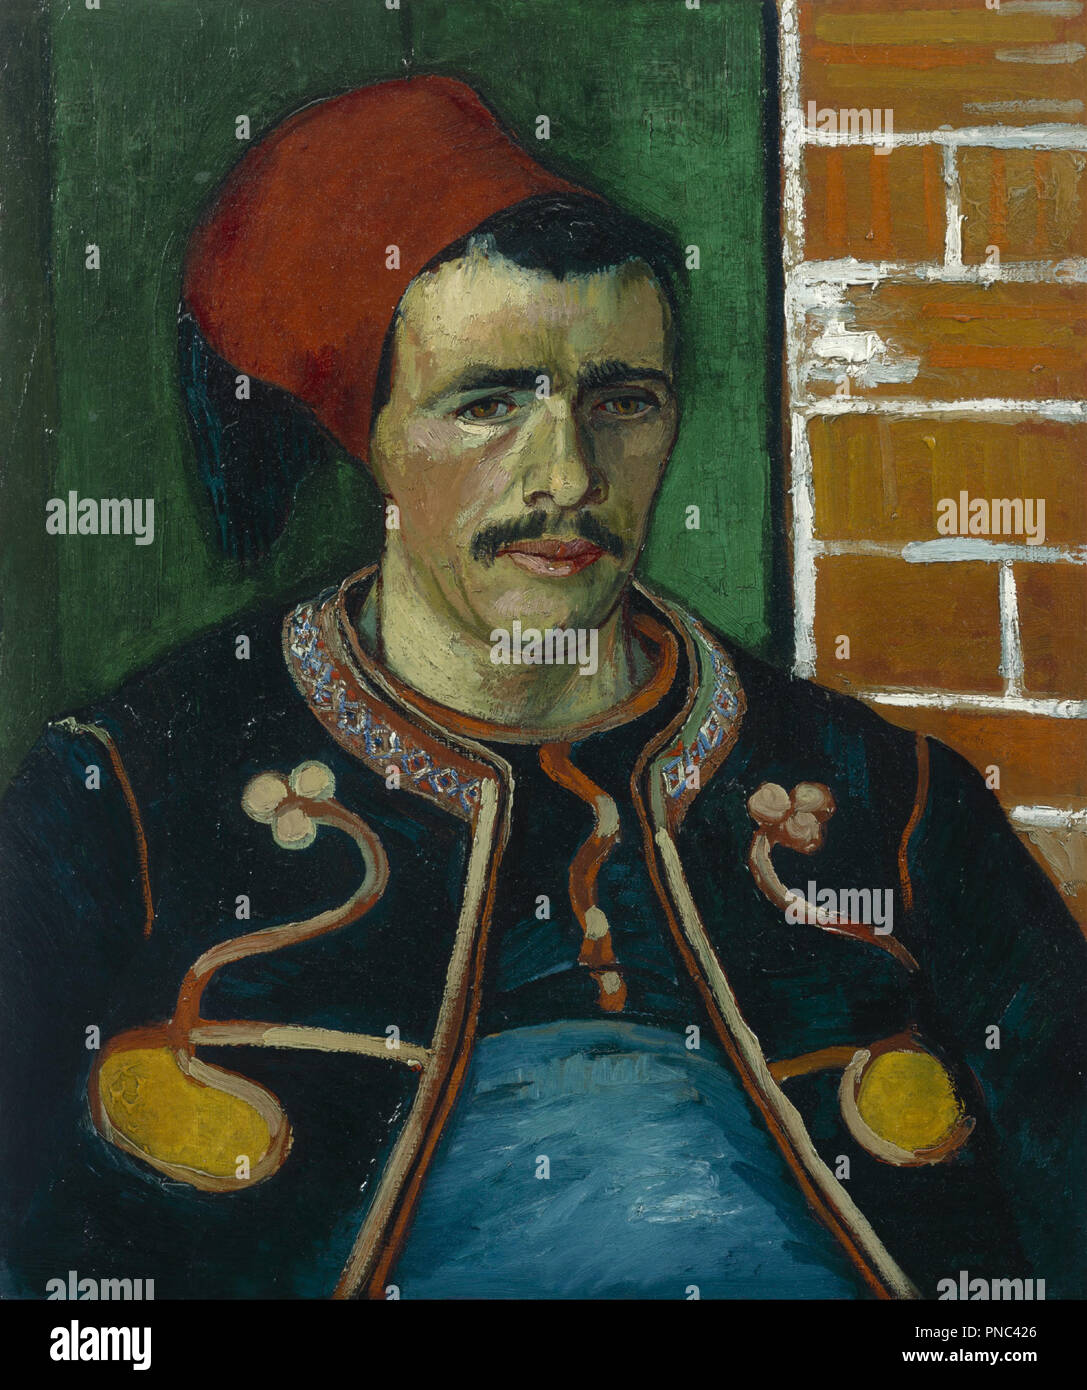 The Zouave. Date/Period: June 1888 - 1888. Painting. Oil on canvas. Height: 65 cm (25.5 in); Width: 54 cm (21.2 in). Author: VINCENT VAN GOGH. Stock Photo